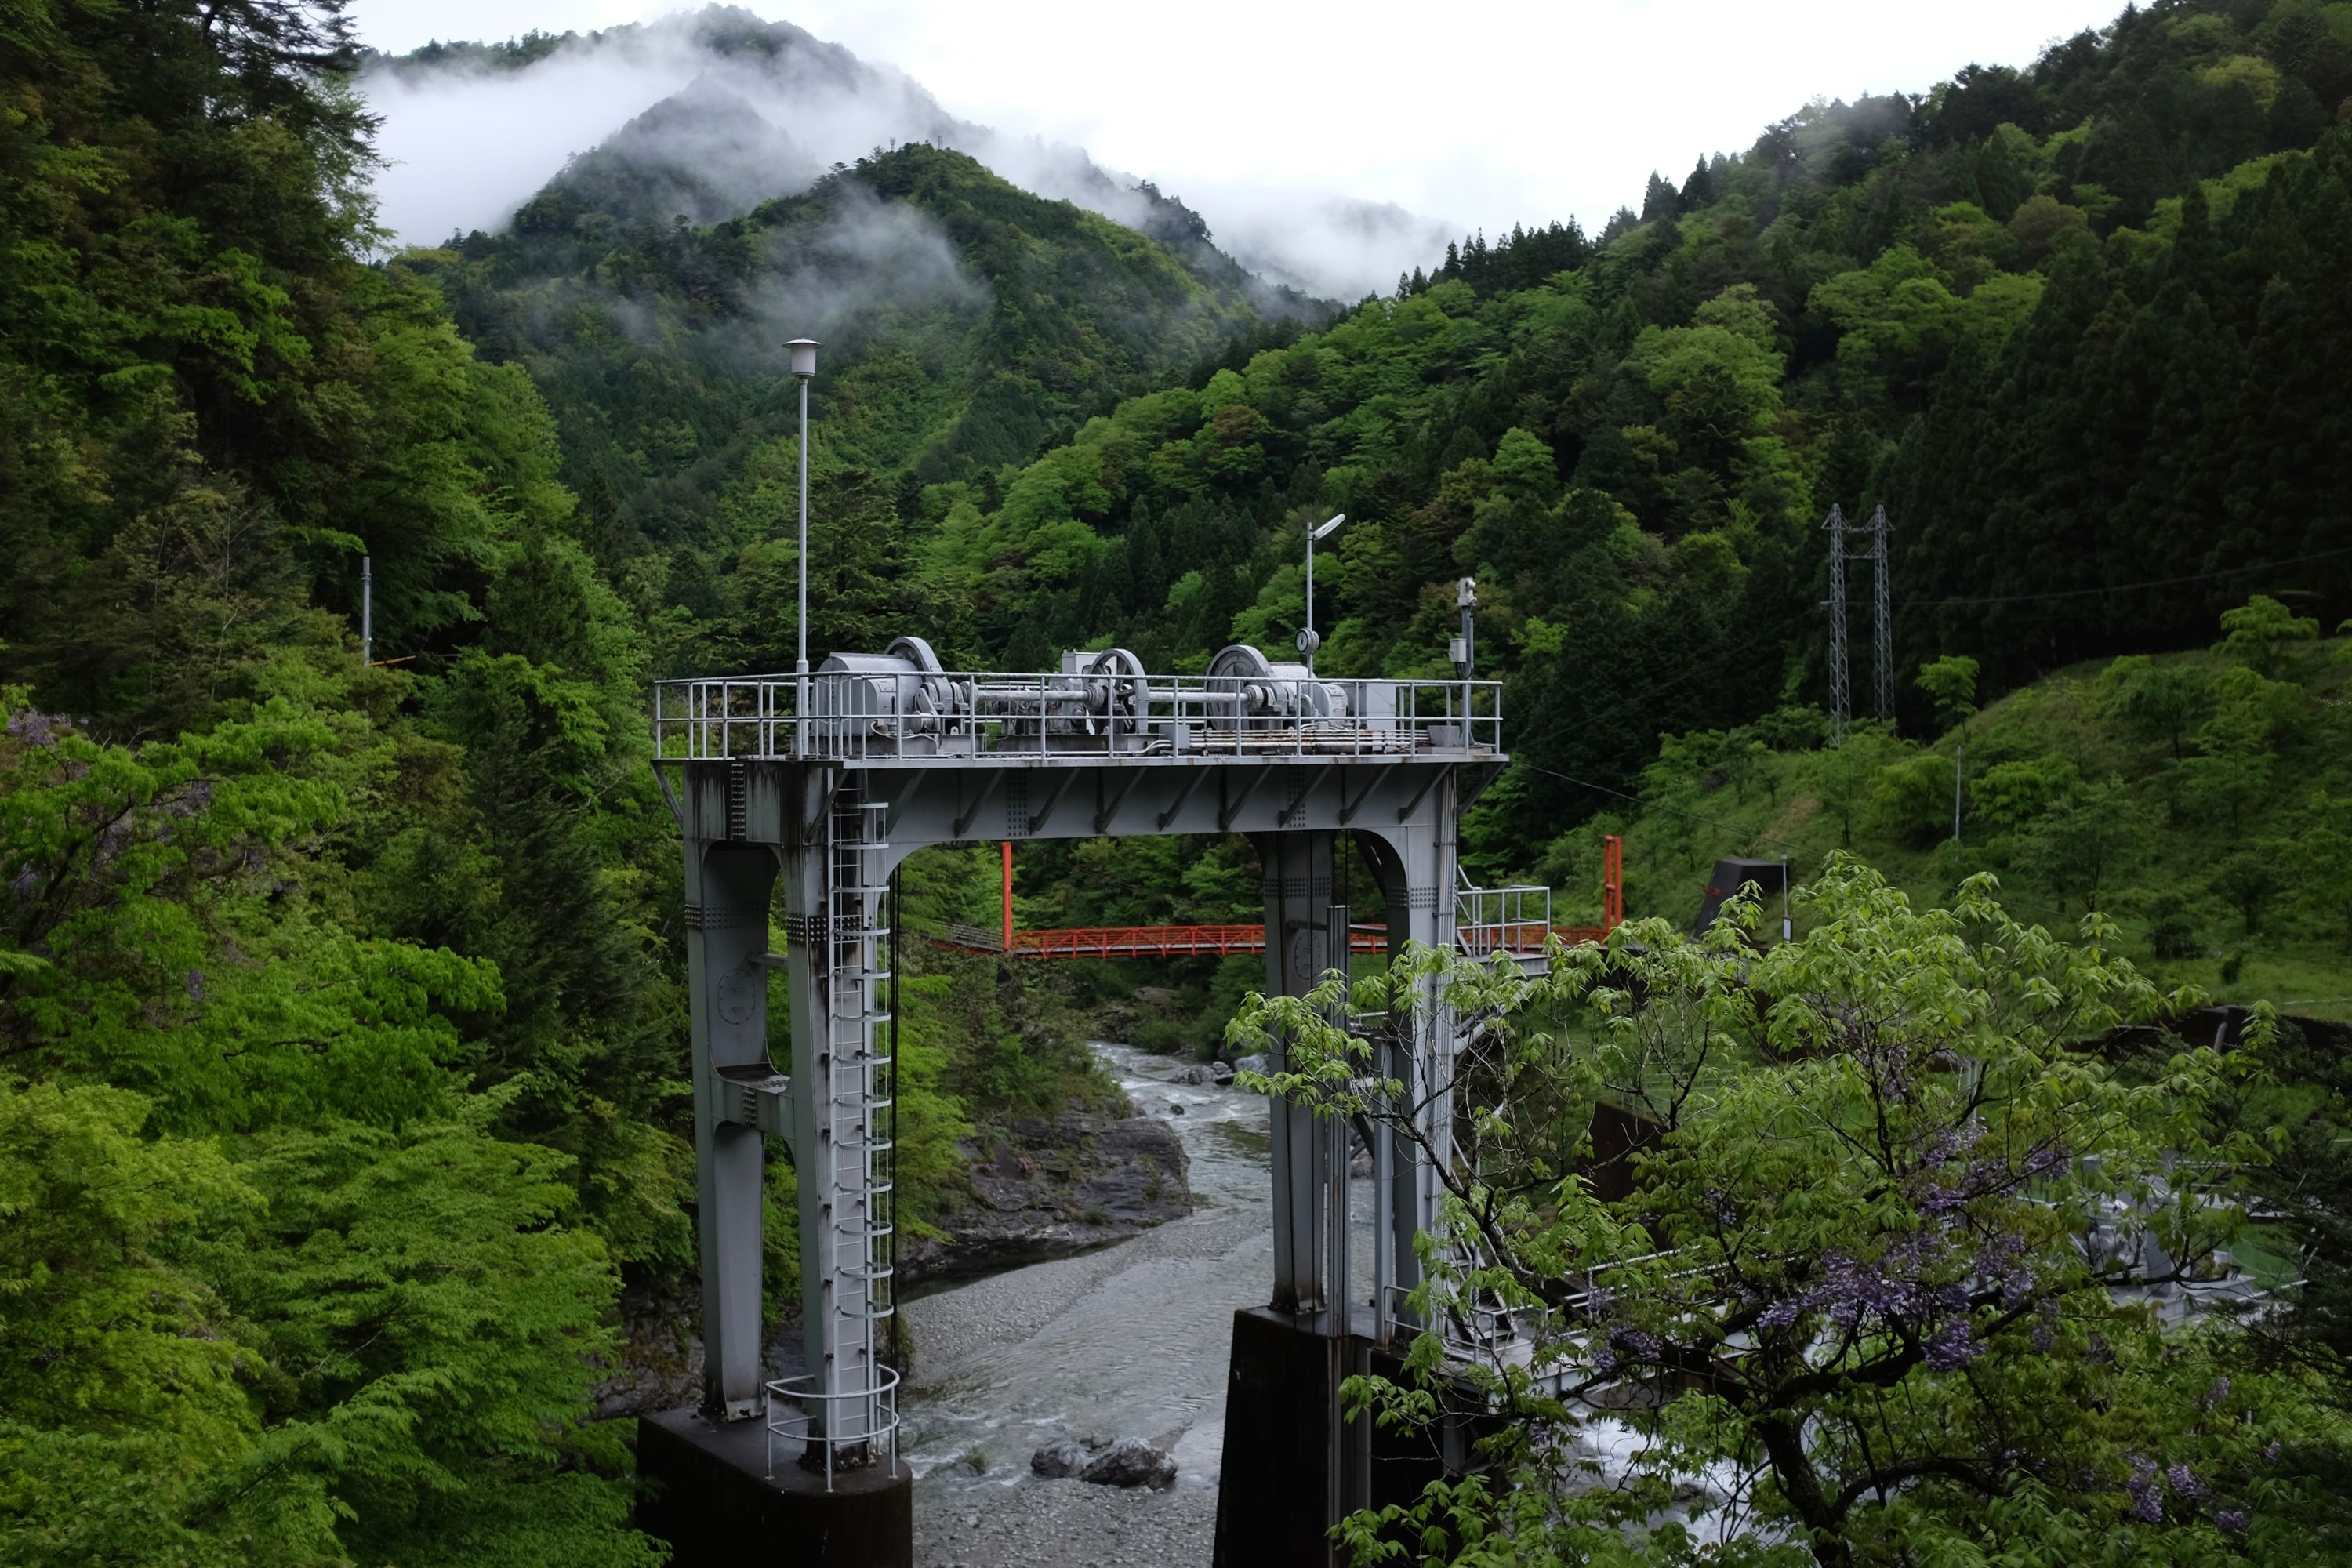 The machinery of a hydroelectric power station stands in thickly forested, verdant green hills.